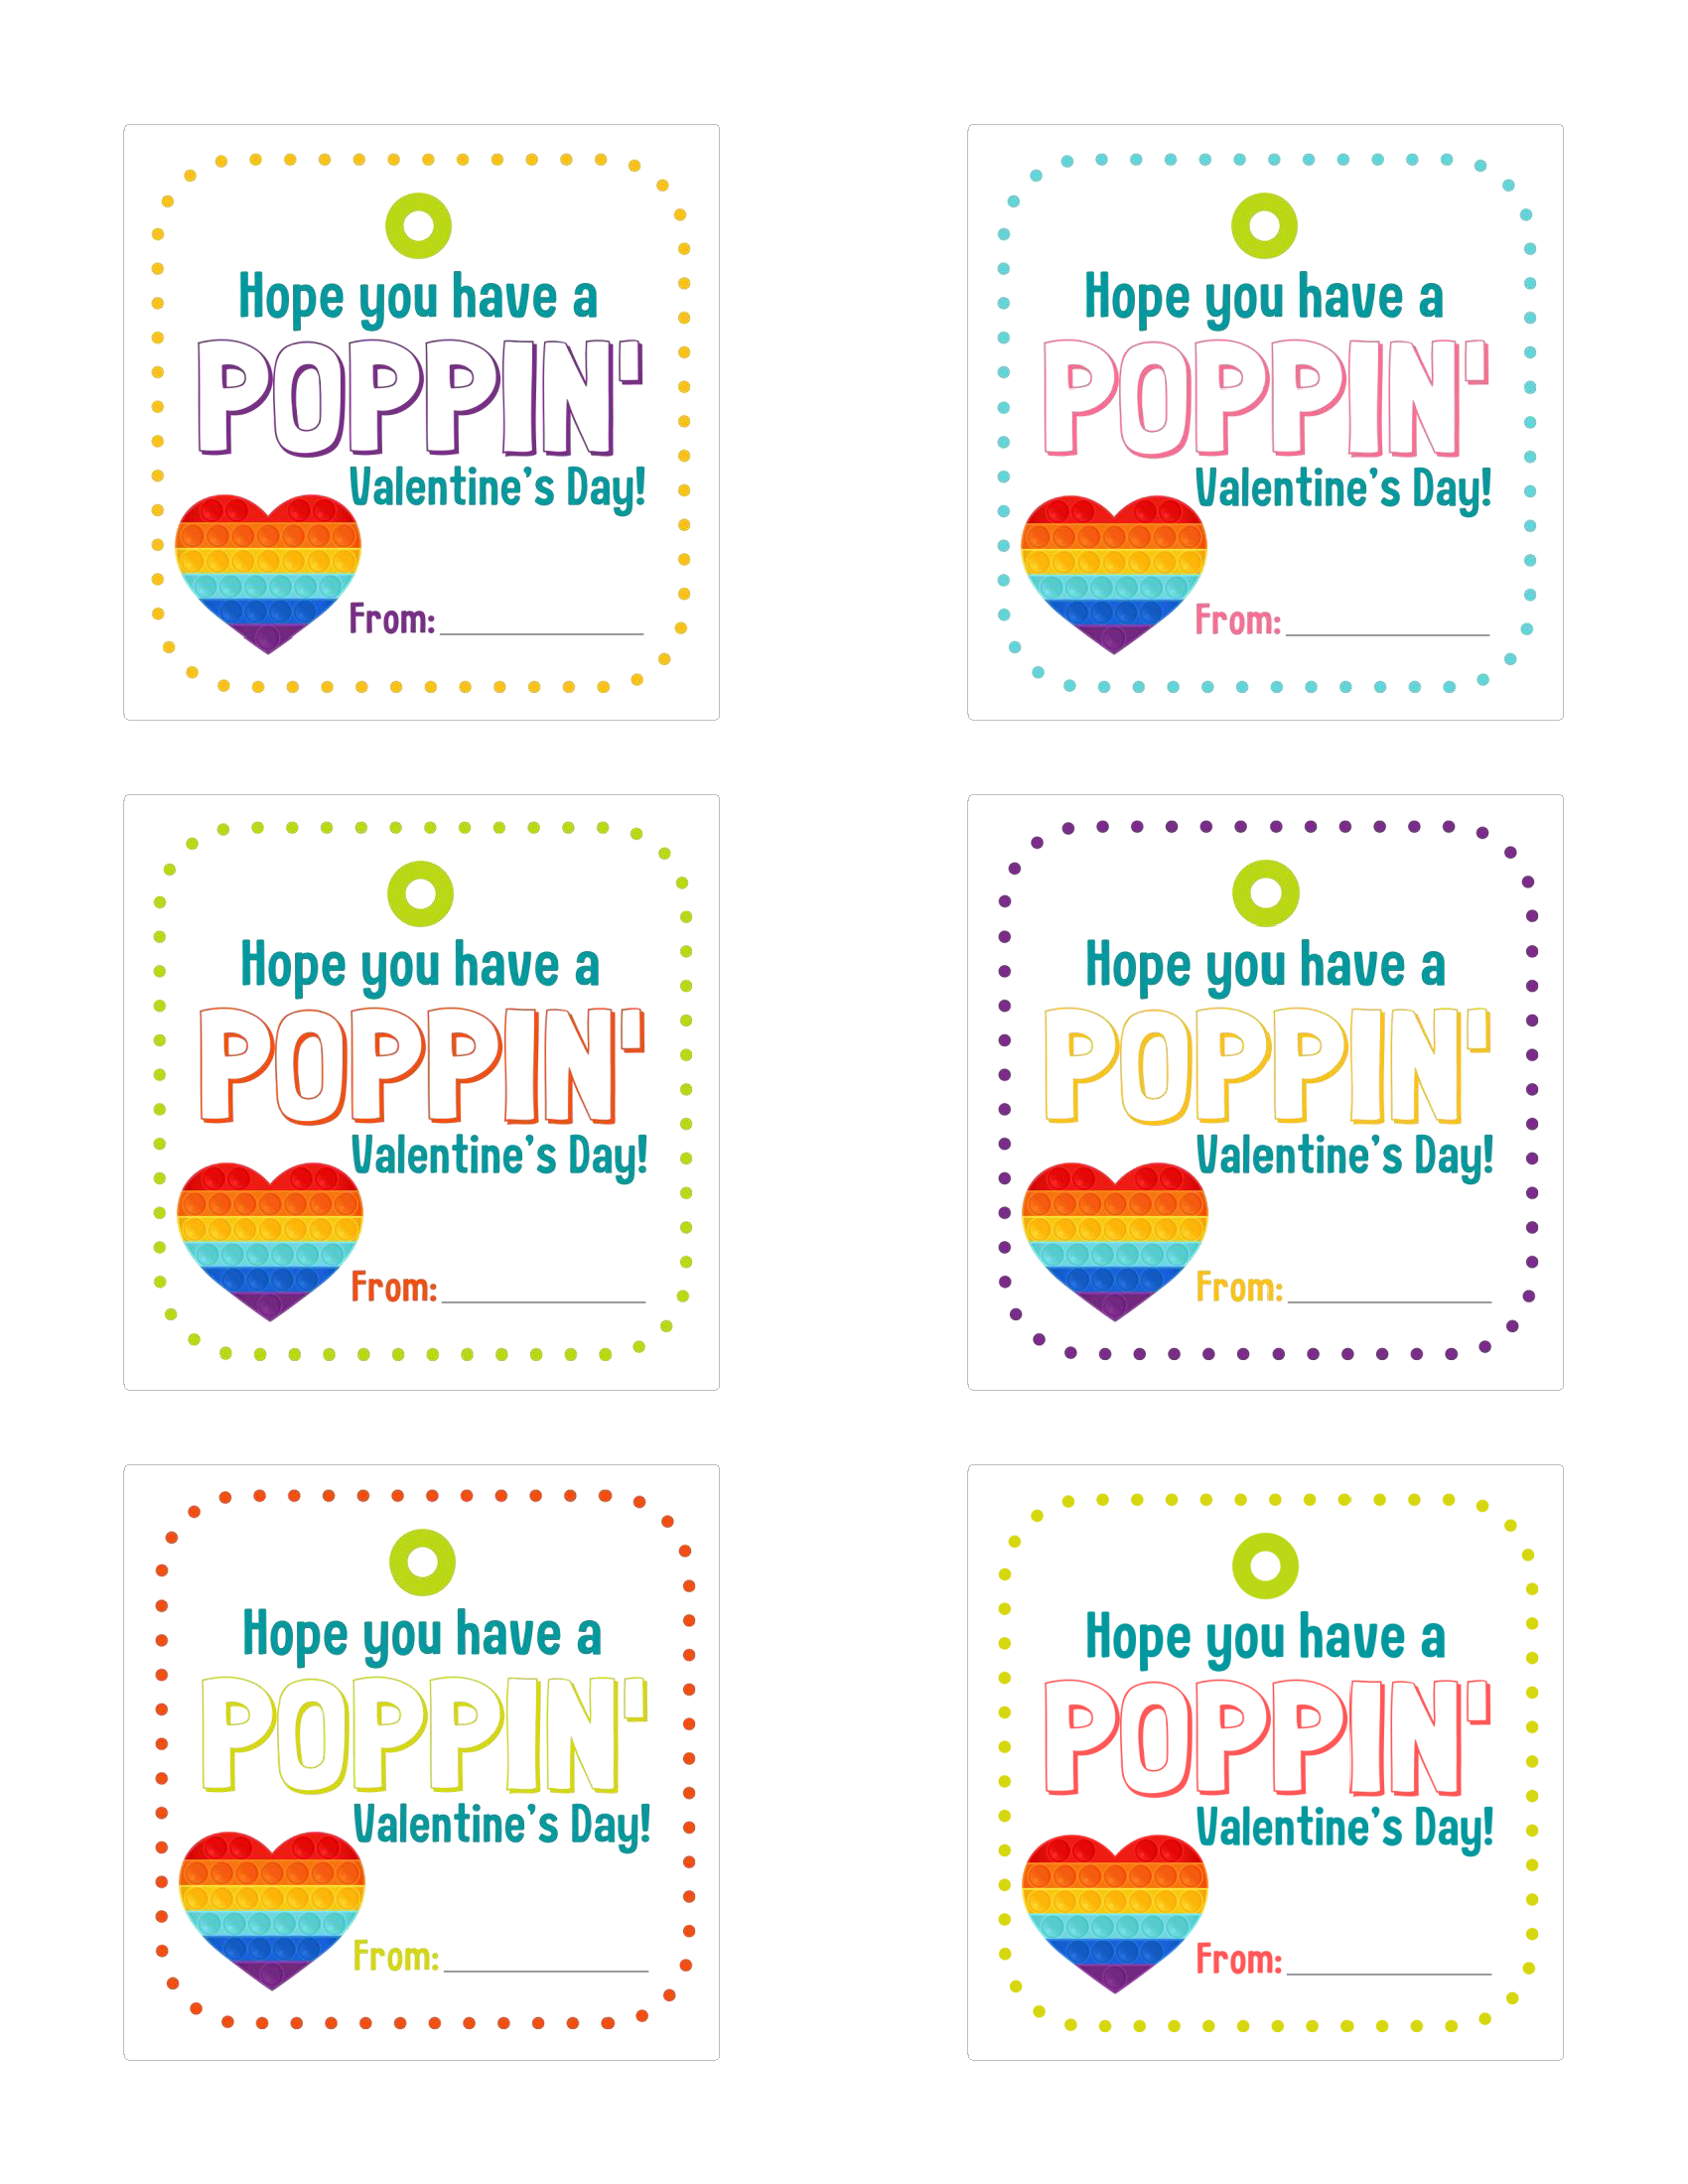 Have a Poppin’ Valentine’s Day Free Printable Baking You Happier